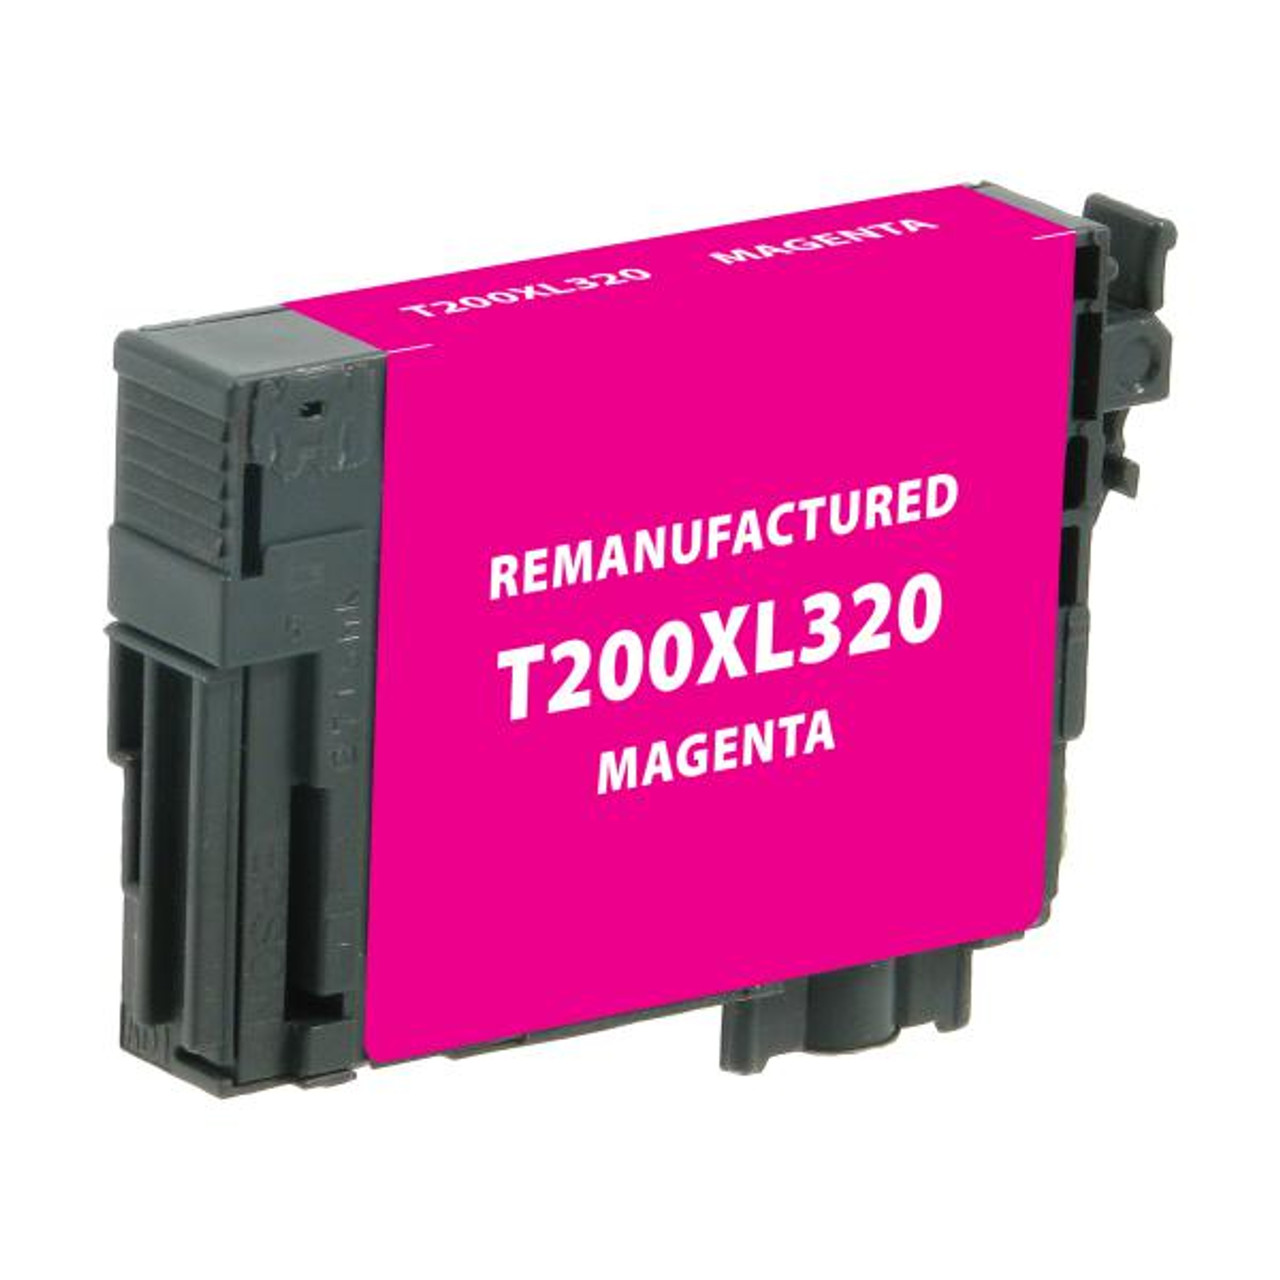 High Capacity Magenta Ink Cartridge for Epson T200XL320-1